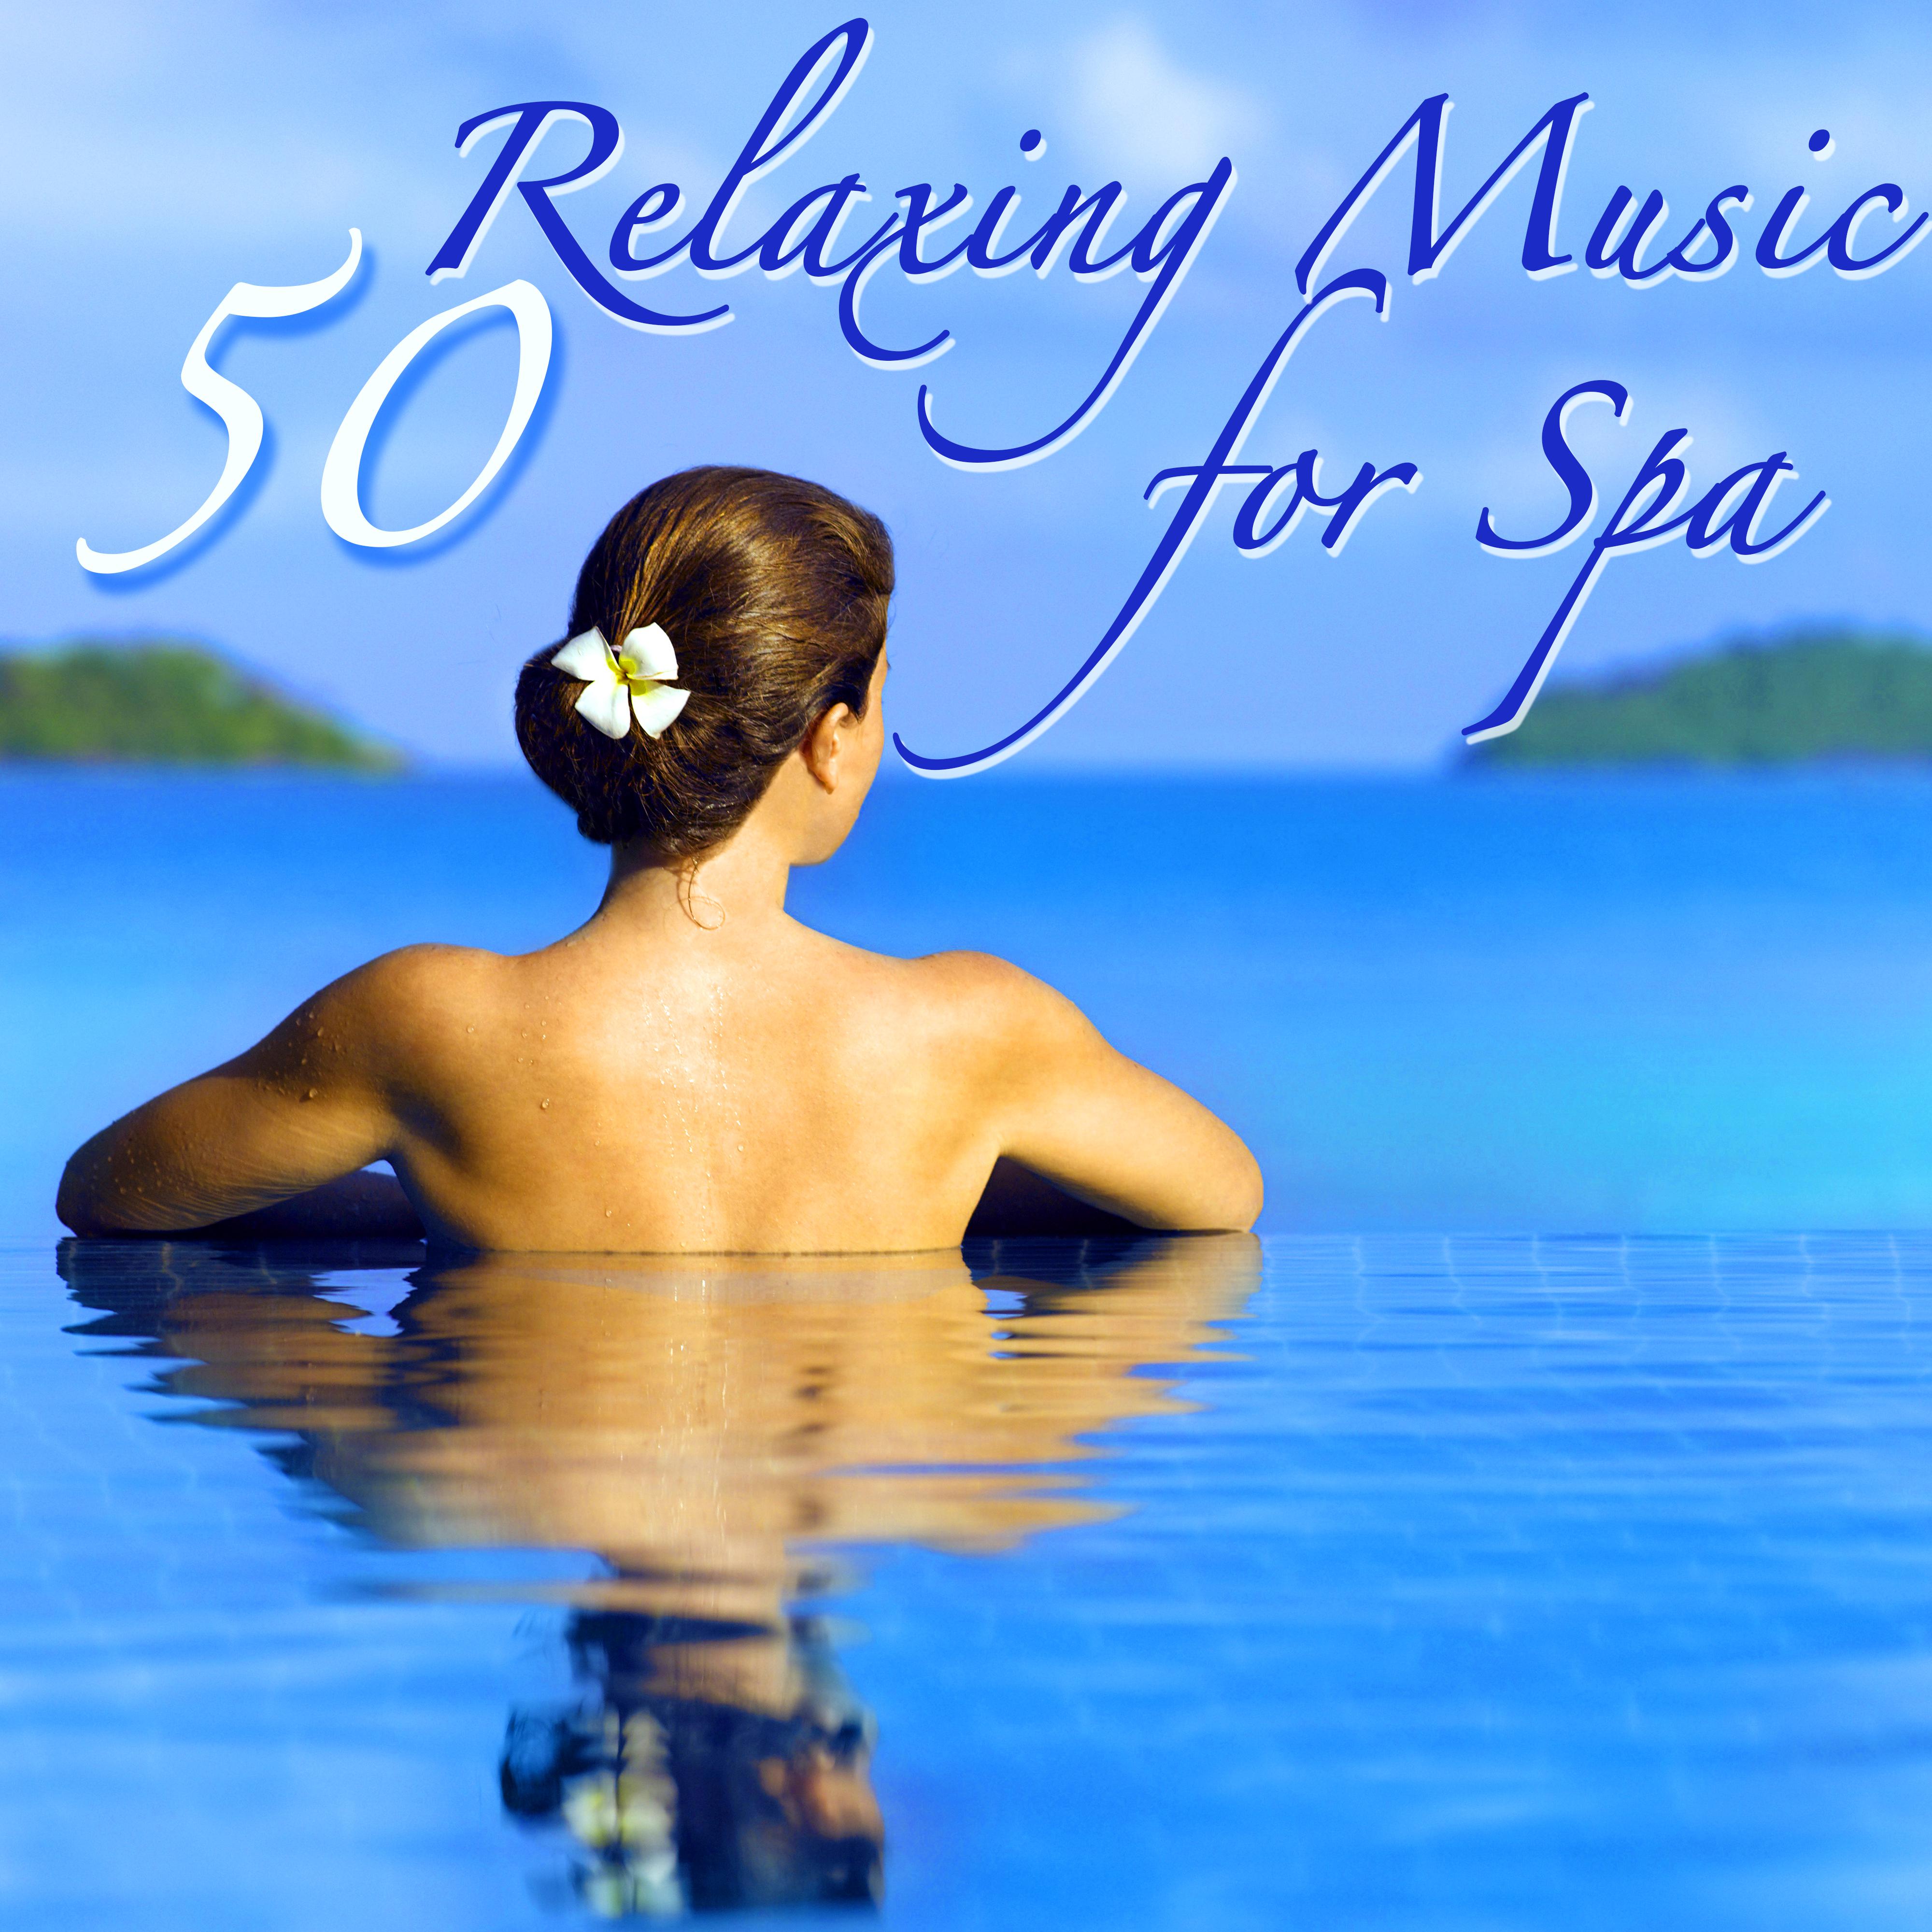 50 Relaxing Music for Spa  Amazing Nature Sounds World Music for Spa Breaks  Massage